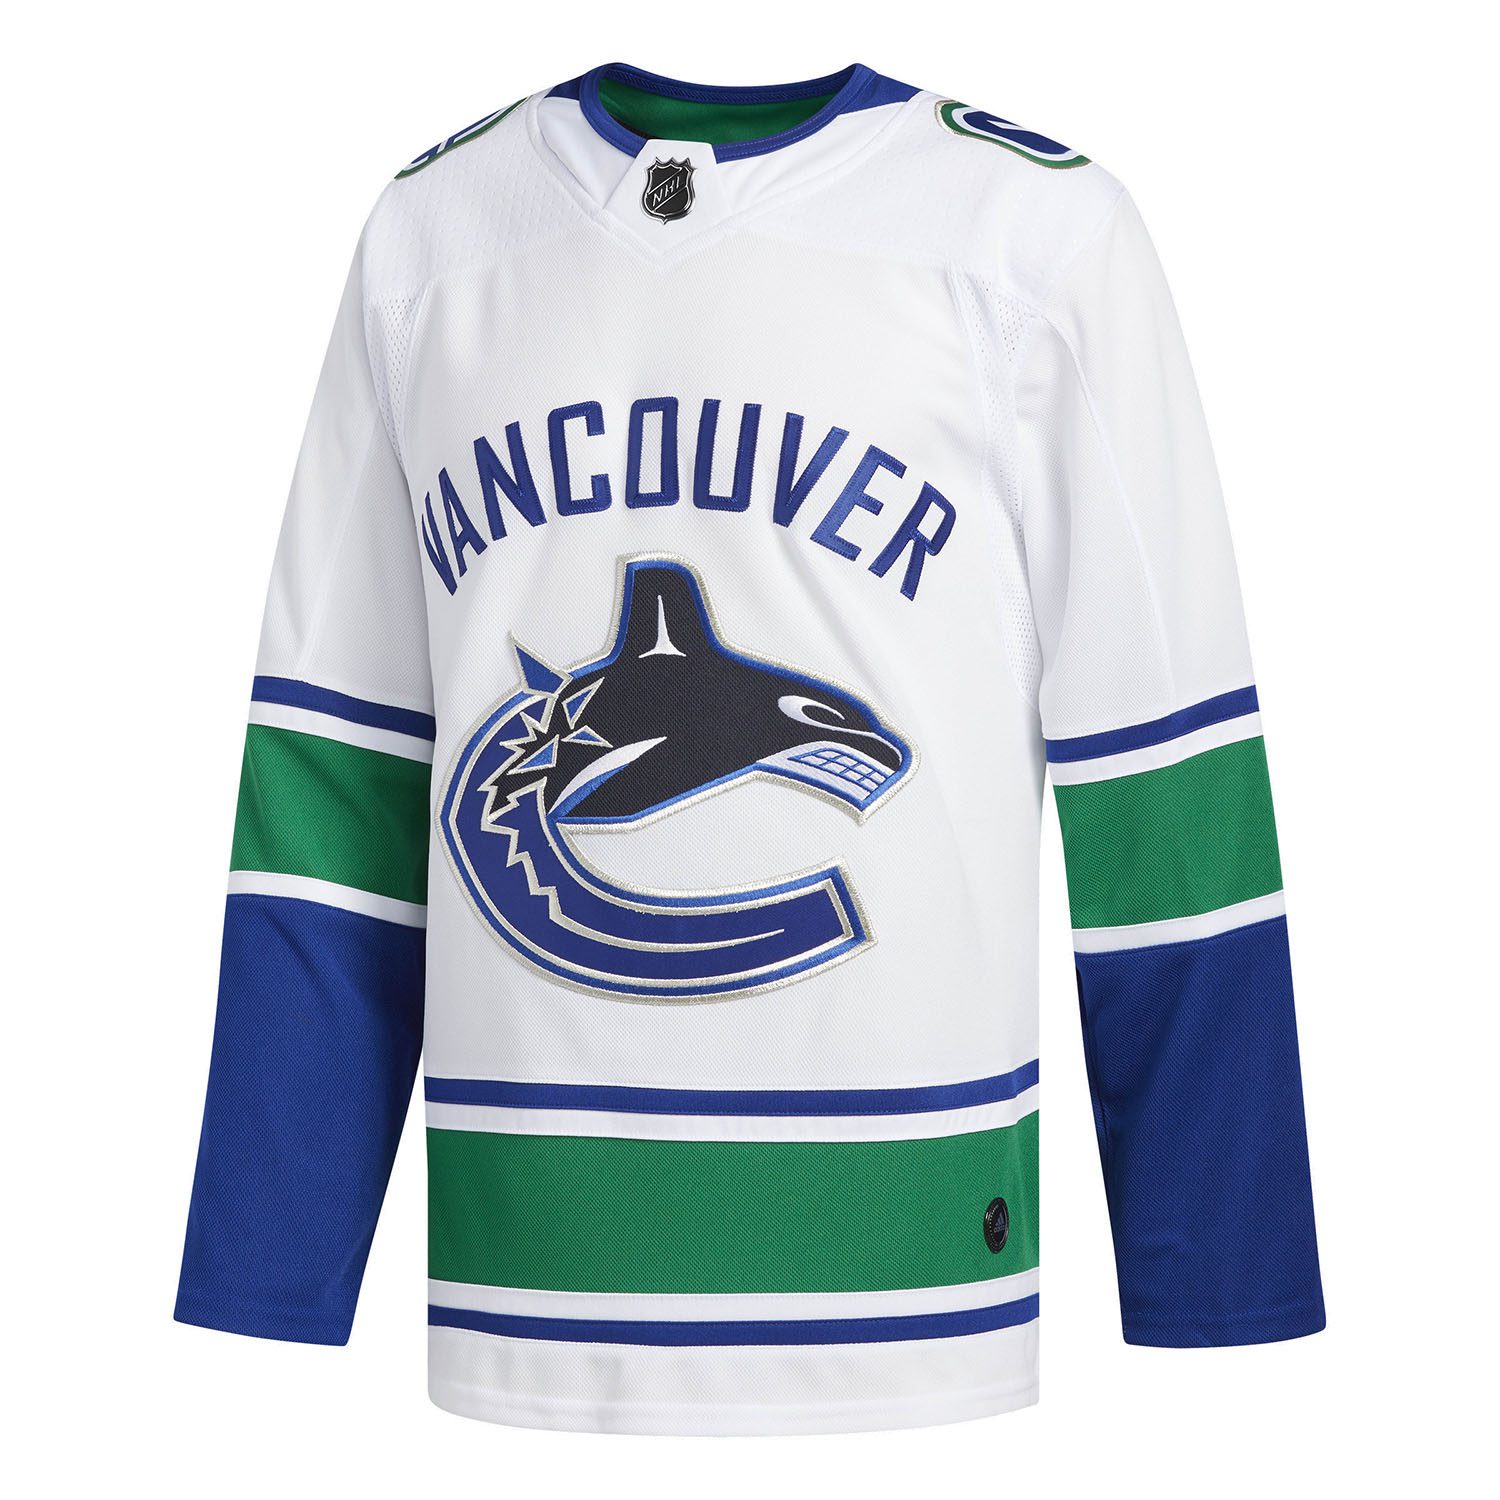 Download Adidas Men's Vancouver Canucks Away Authentic Pro White ...